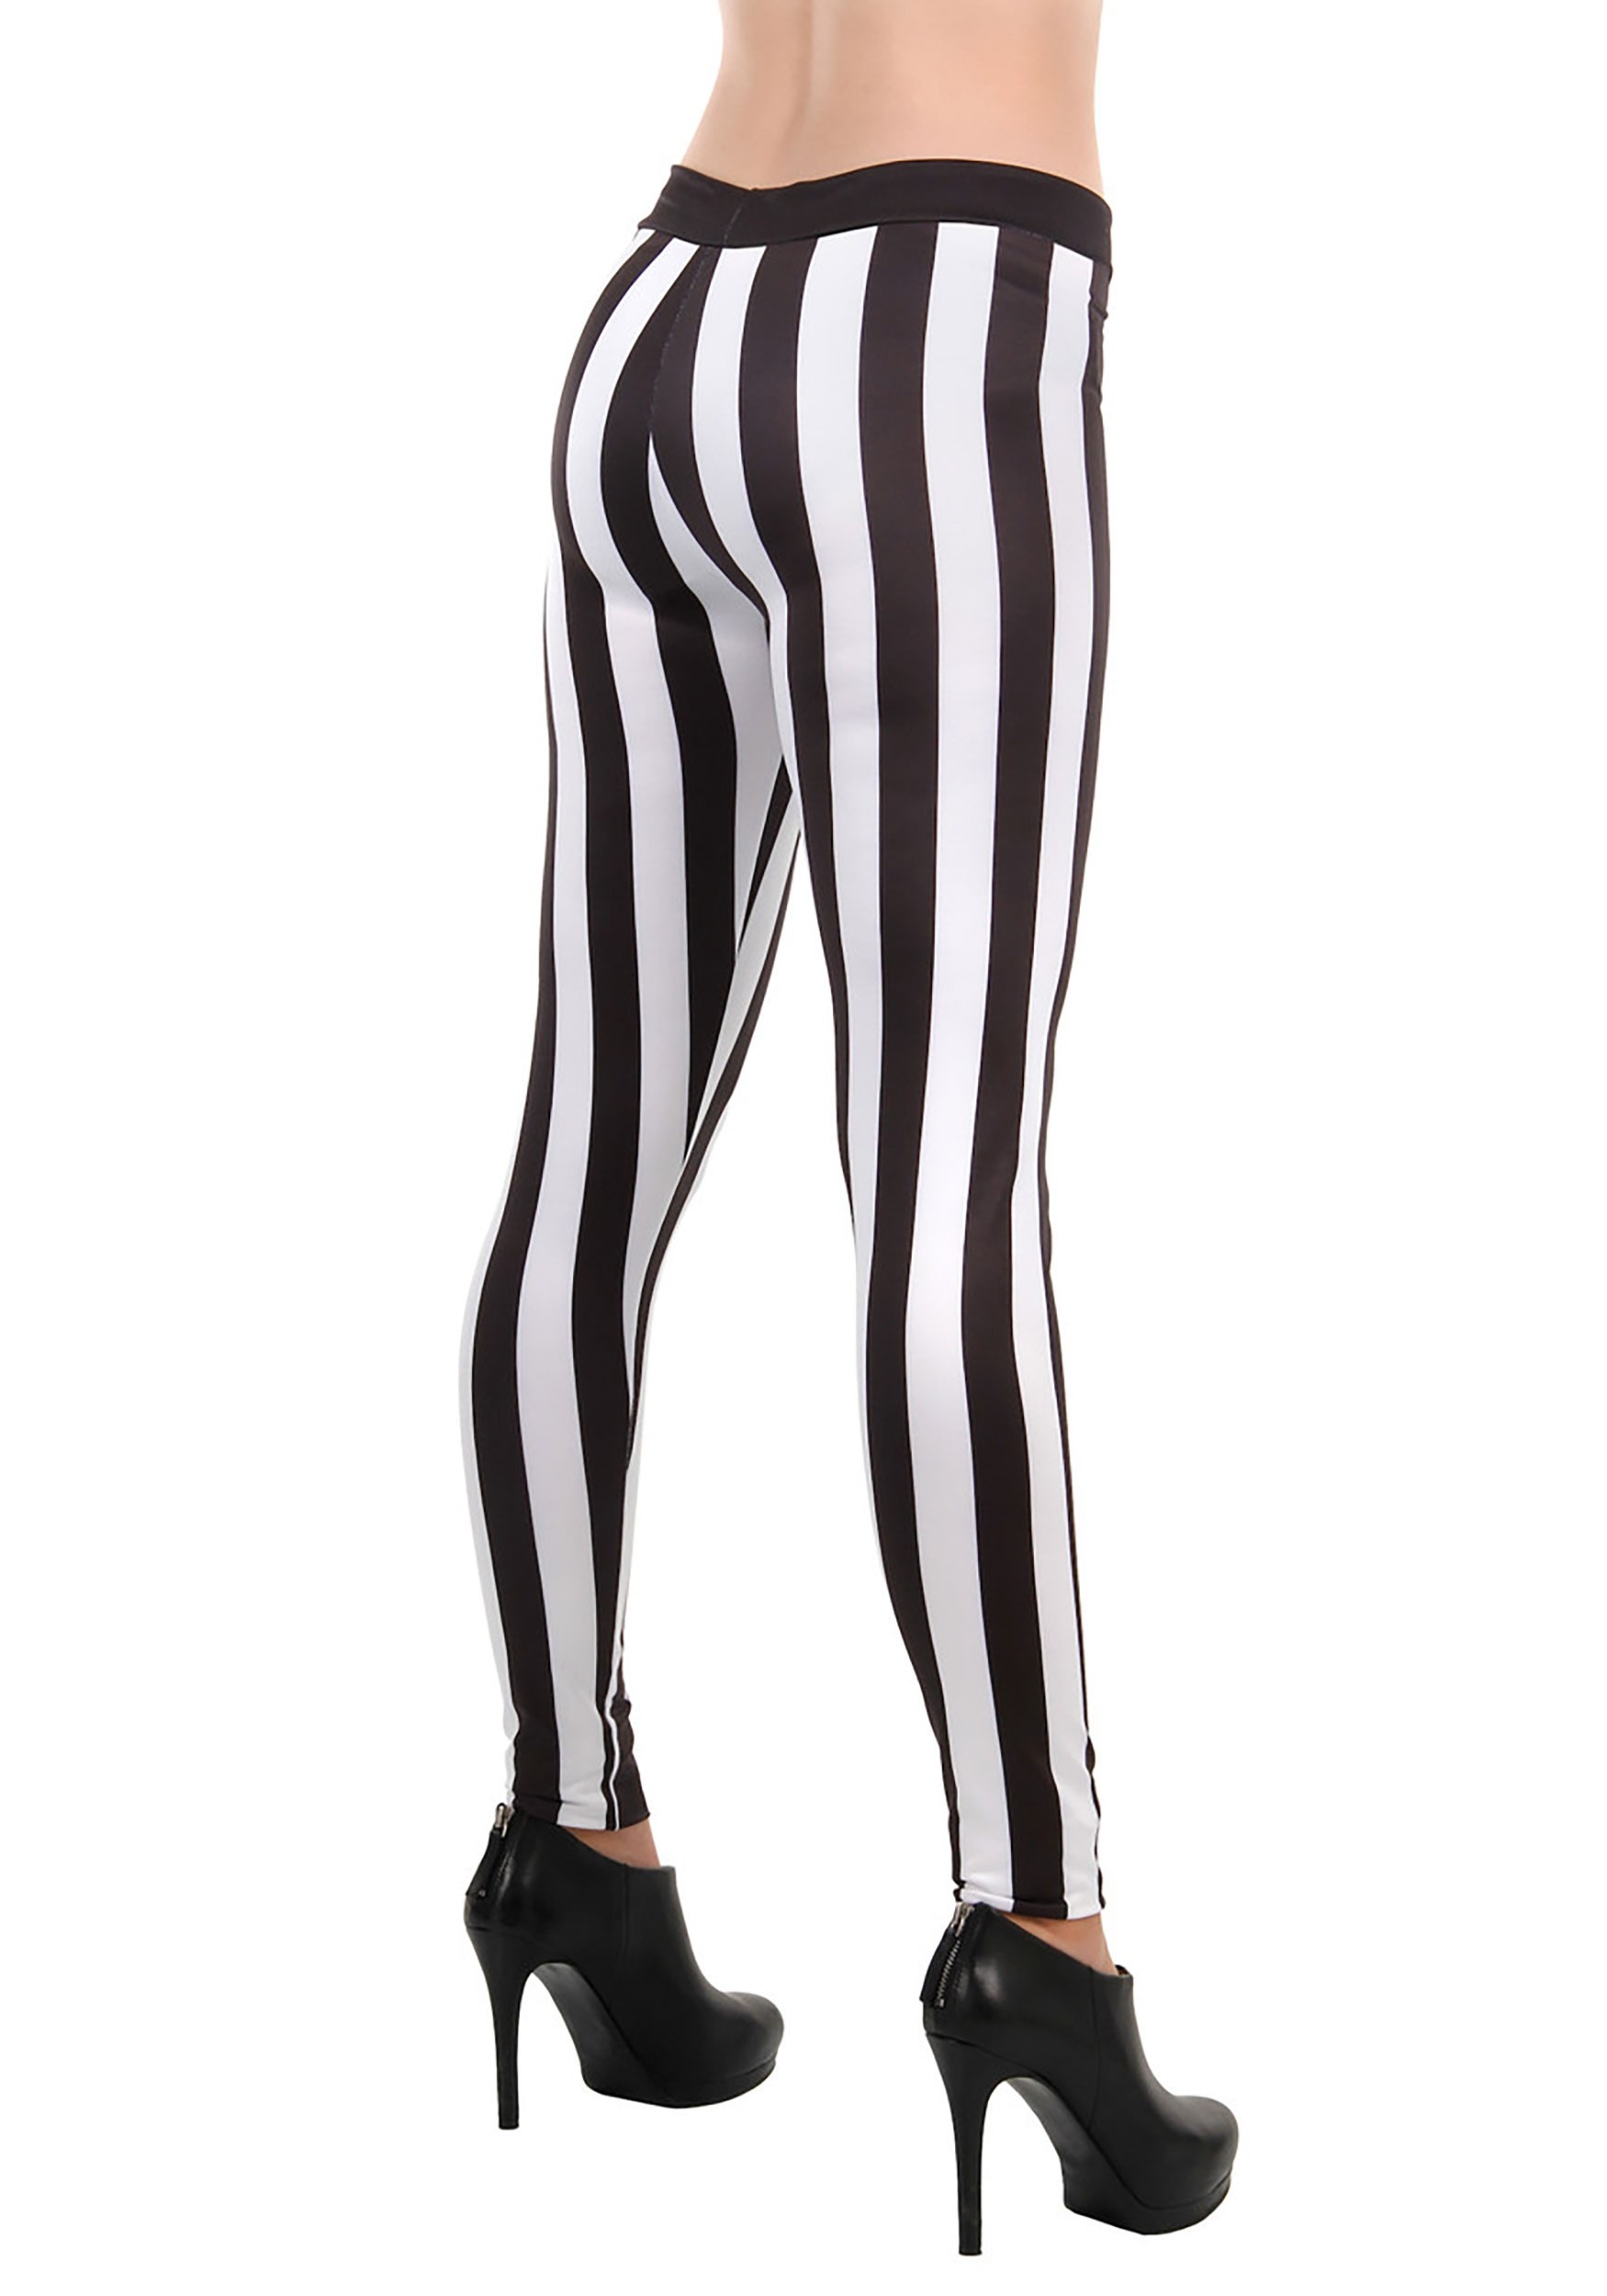 Black and White Stripe Stretchy Tights - Adult Standard Size, 1